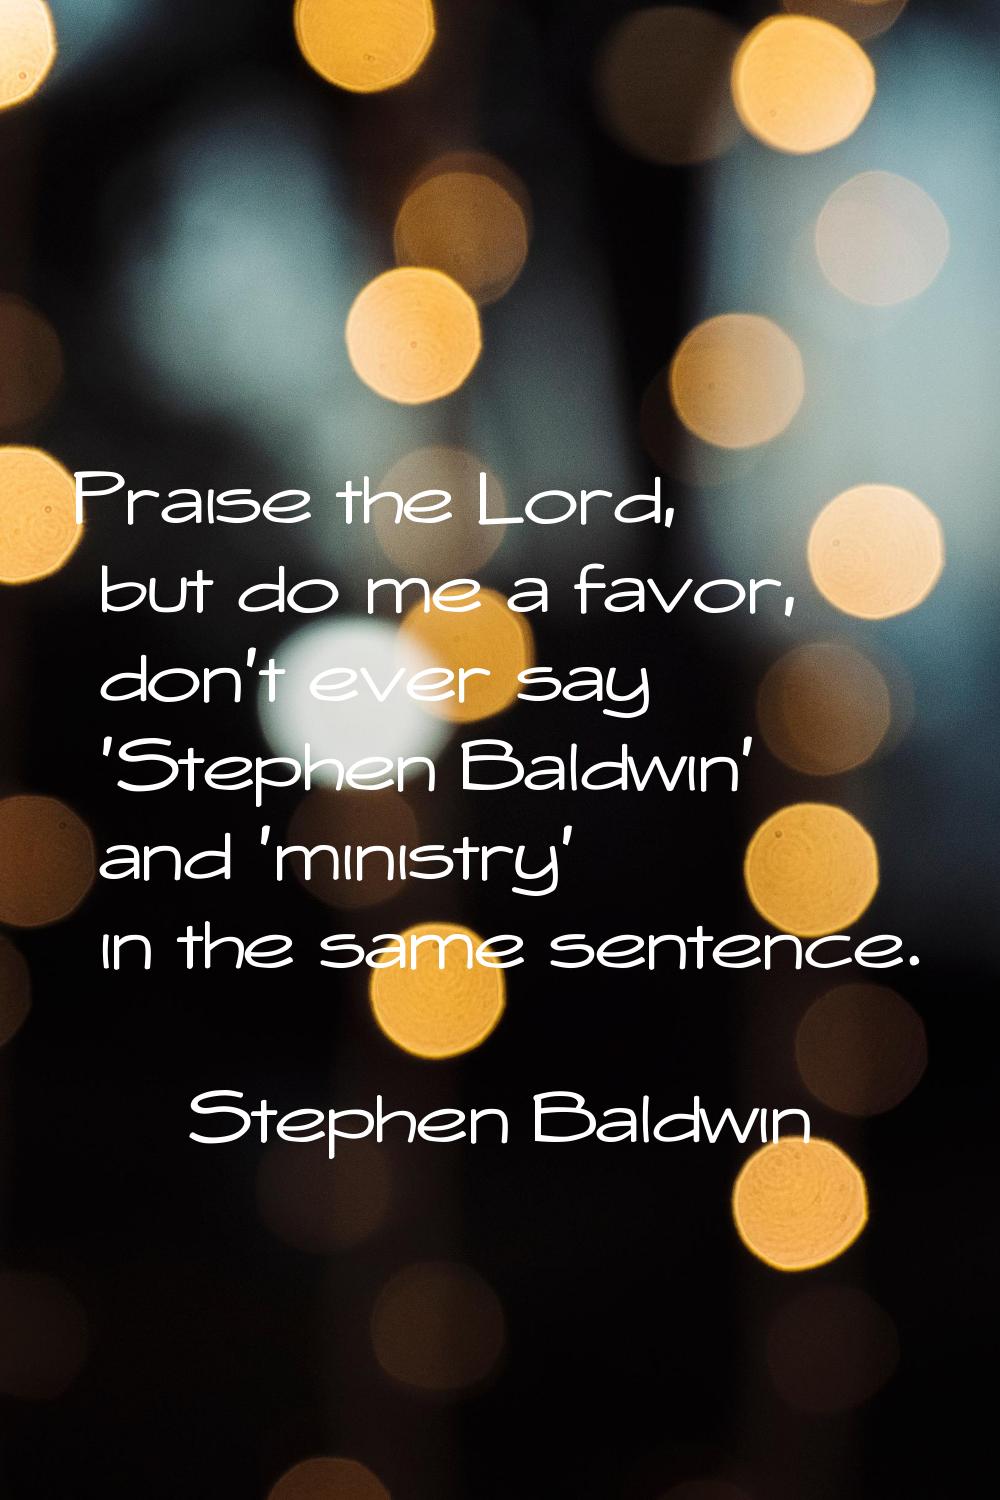 Praise the Lord, but do me a favor, don't ever say 'Stephen Baldwin' and 'ministry' in the same sen